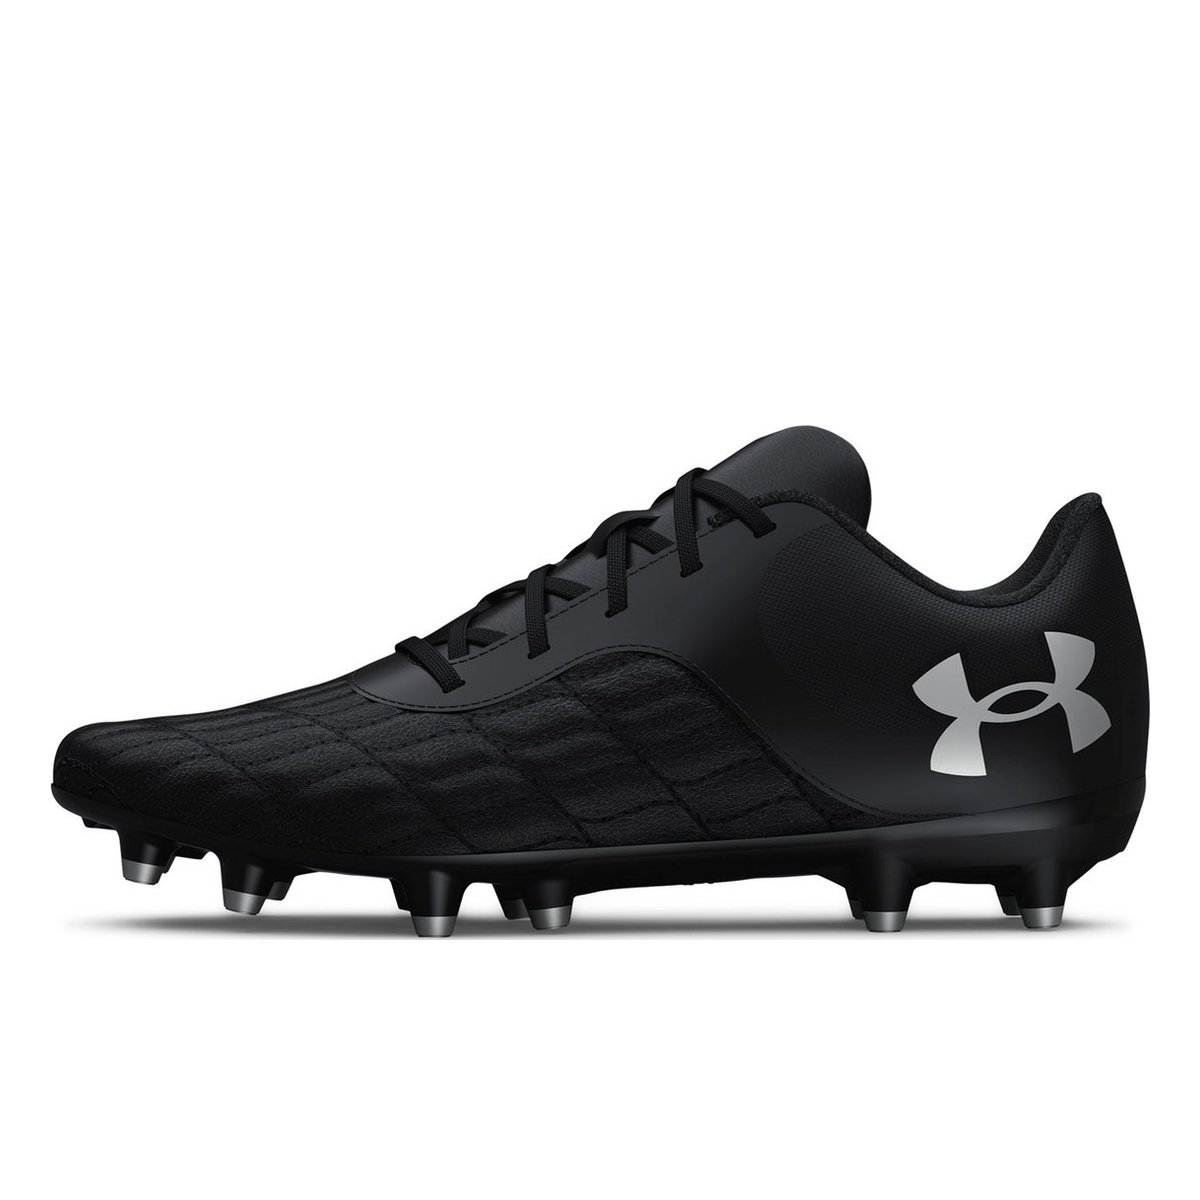 Botas Rugby Under Armour - Outlet Exclusivo